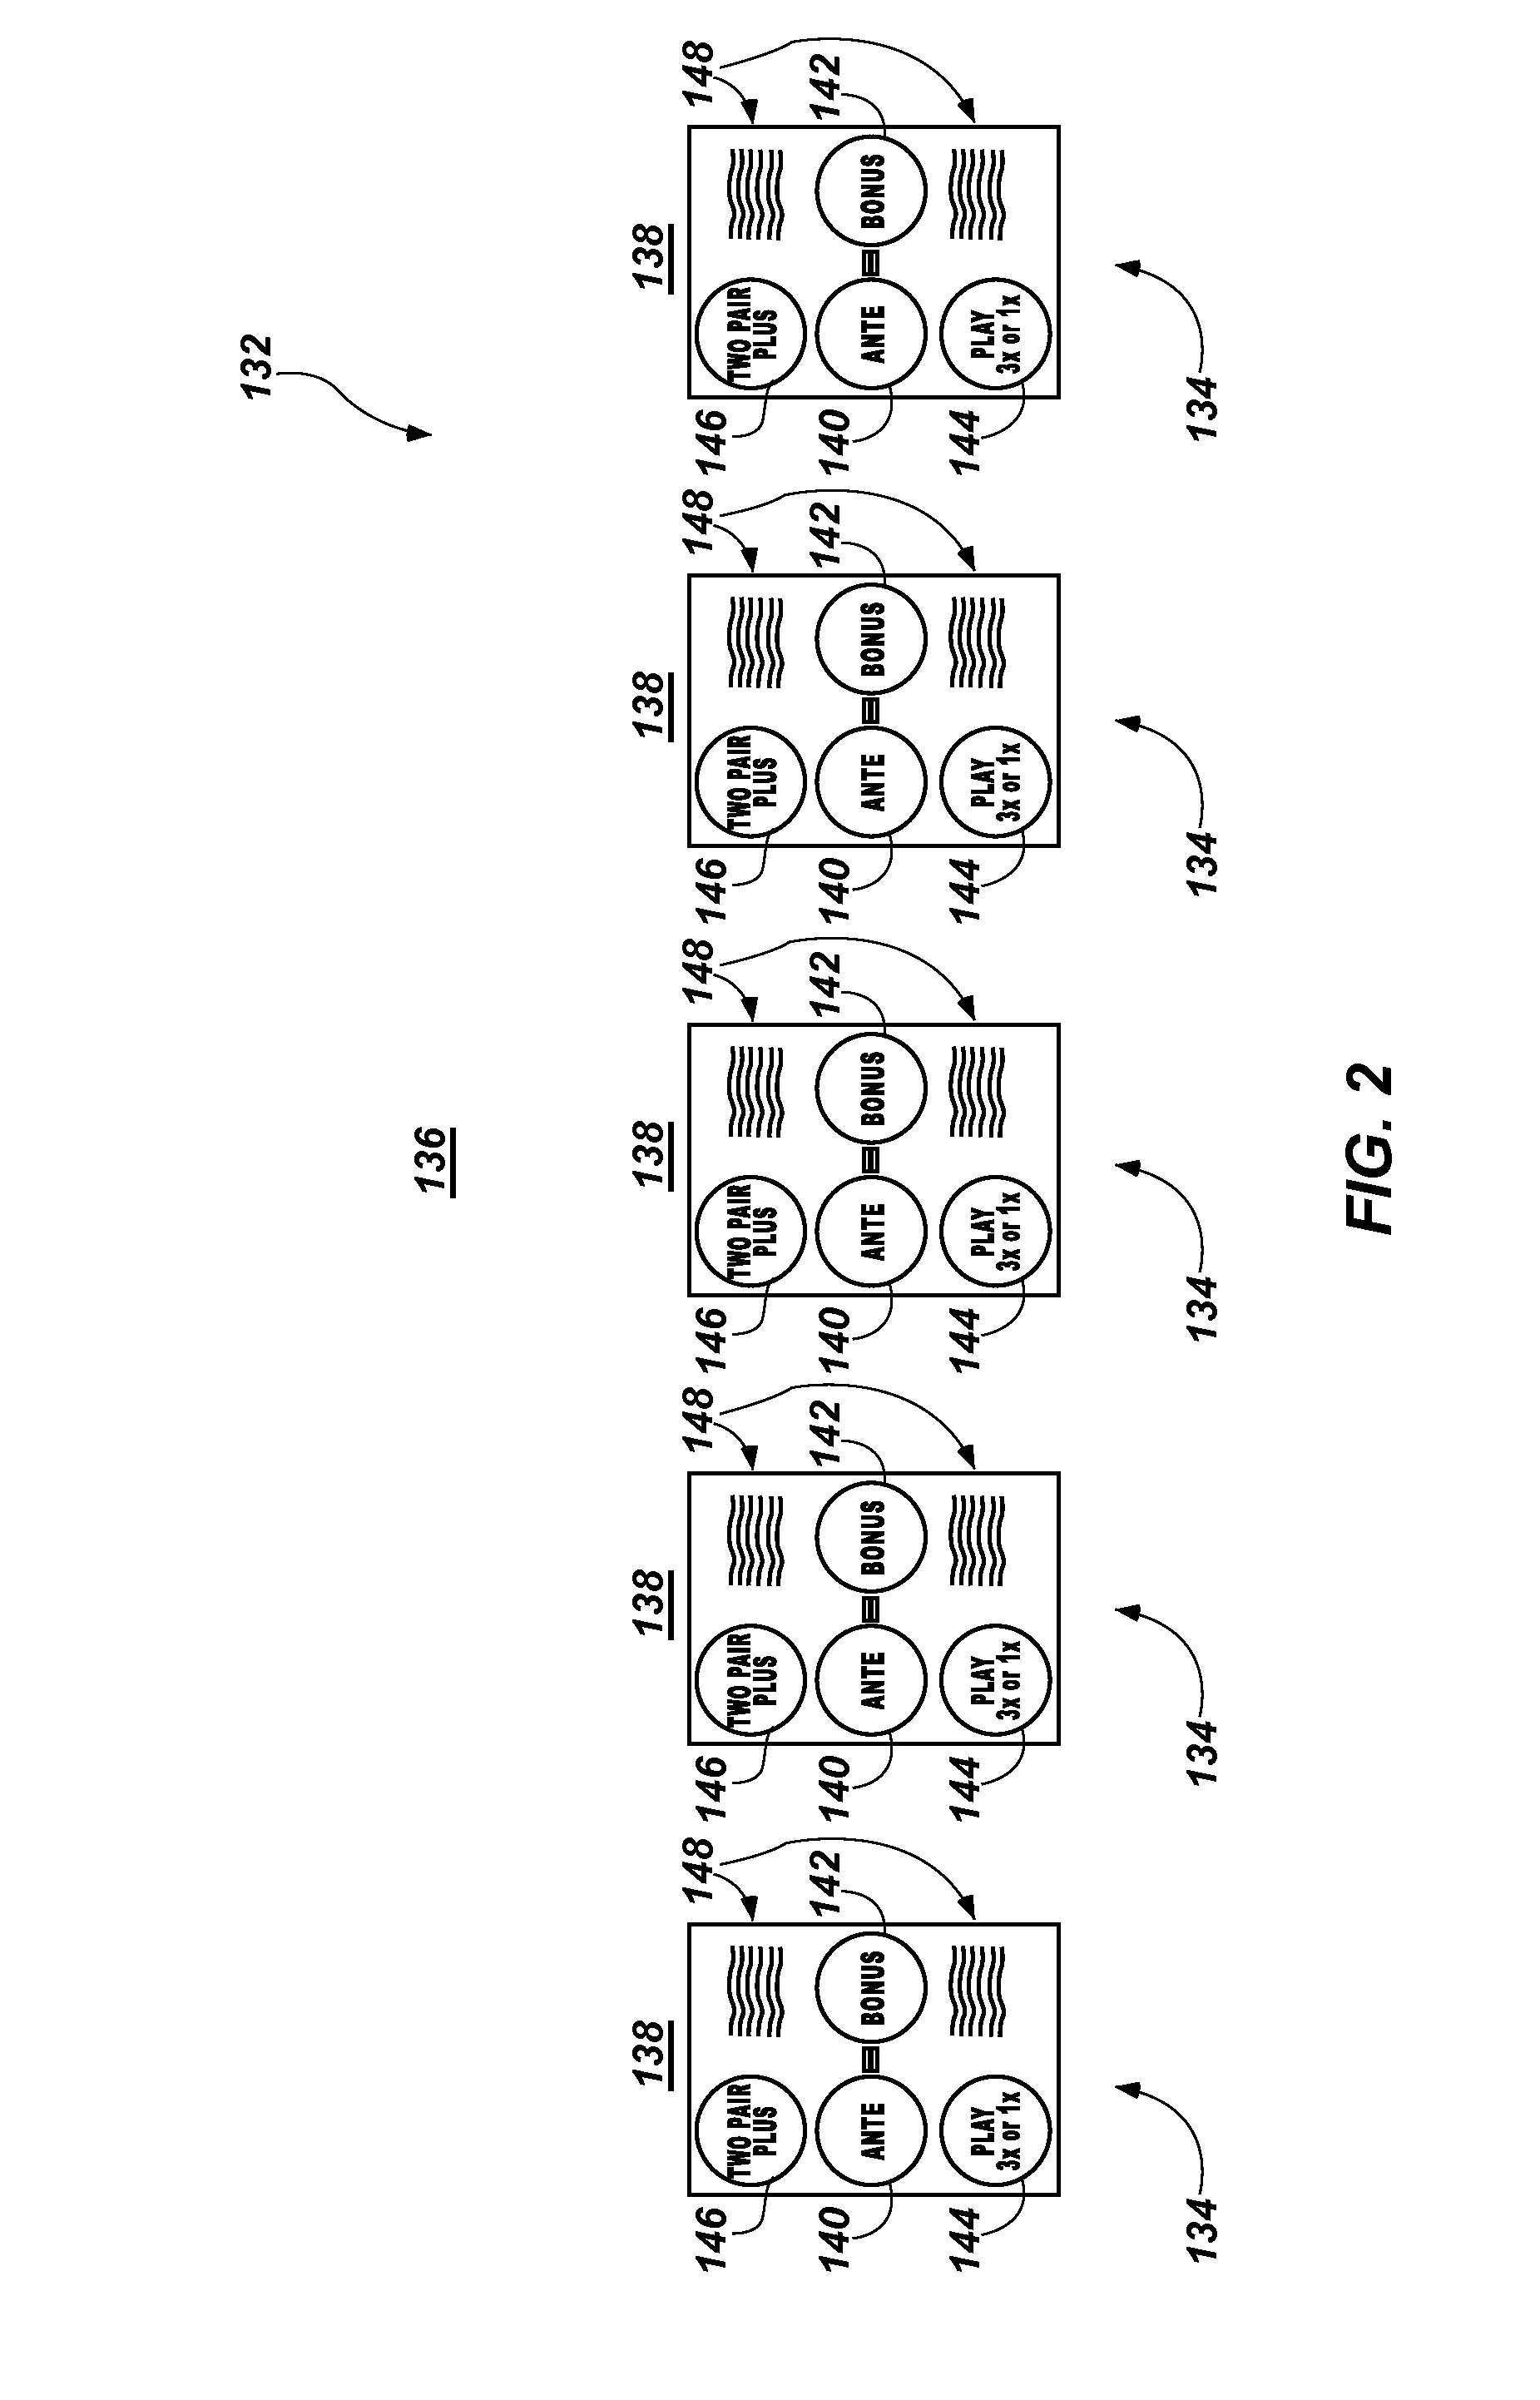 Methods, Systems and Apparatus for Administering Wagering Games